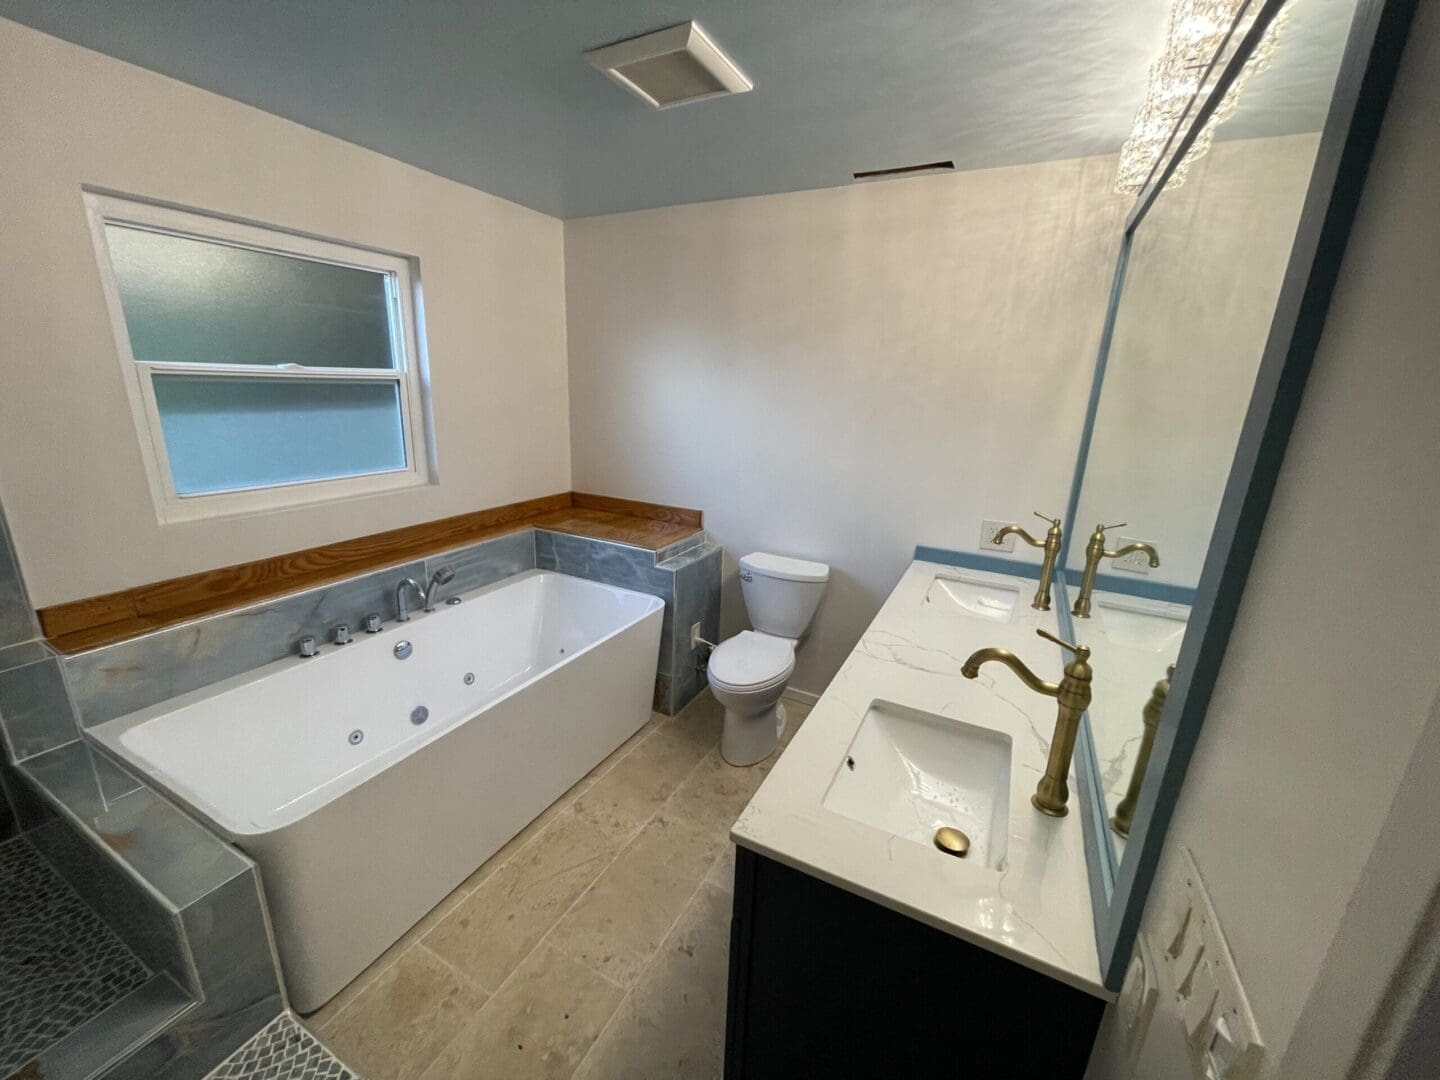 a bathroom with a commode, bath tub, and sink